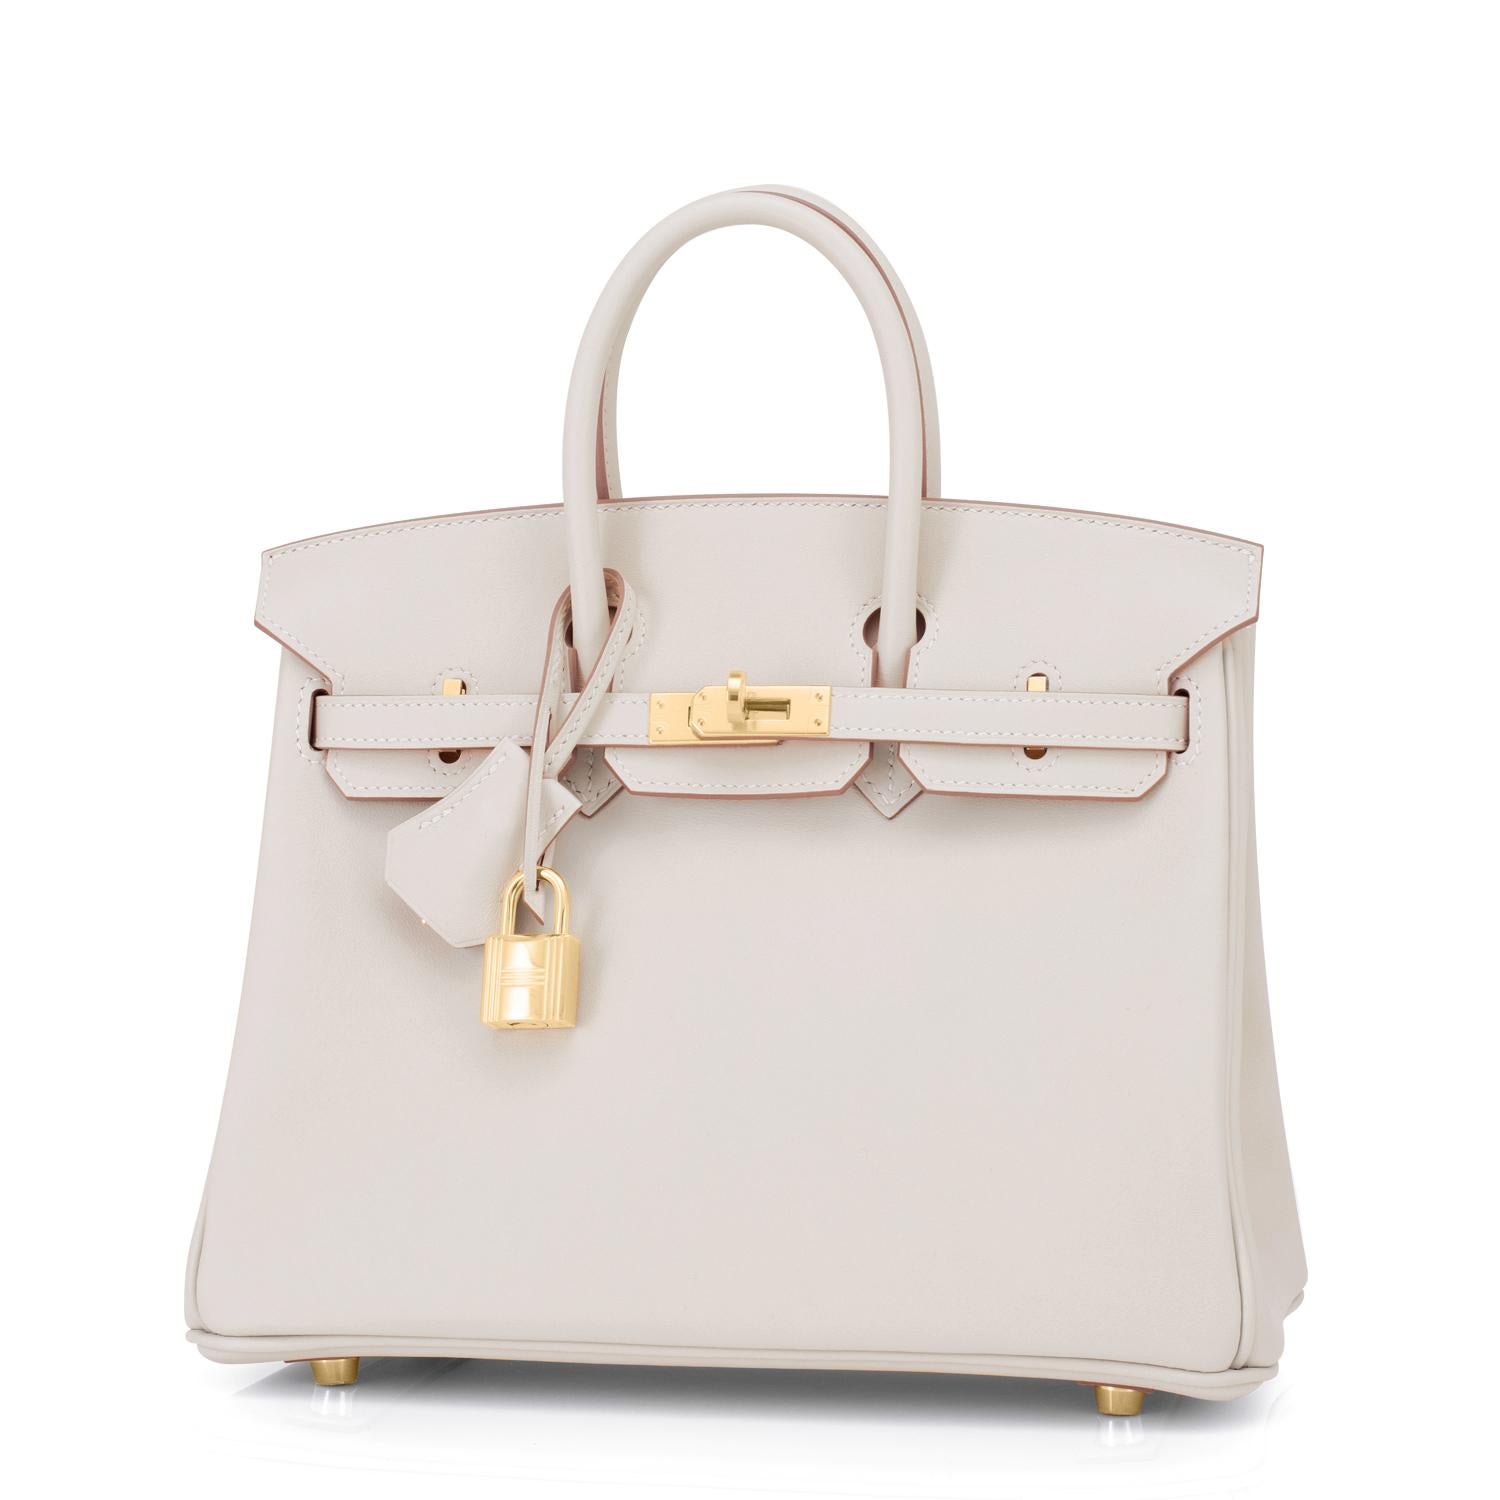 Guaranteed Authentic Hermes Birkin 25cm Beton Gold Hardware Swift Off White Bag Y Stamp, 2020 
Just purchased from Hermes store! Bag bears new interior 2020 Y Stamp.
Brand New in Box.  Store Fresh.  Pristine Condition (with plastic on hardware)